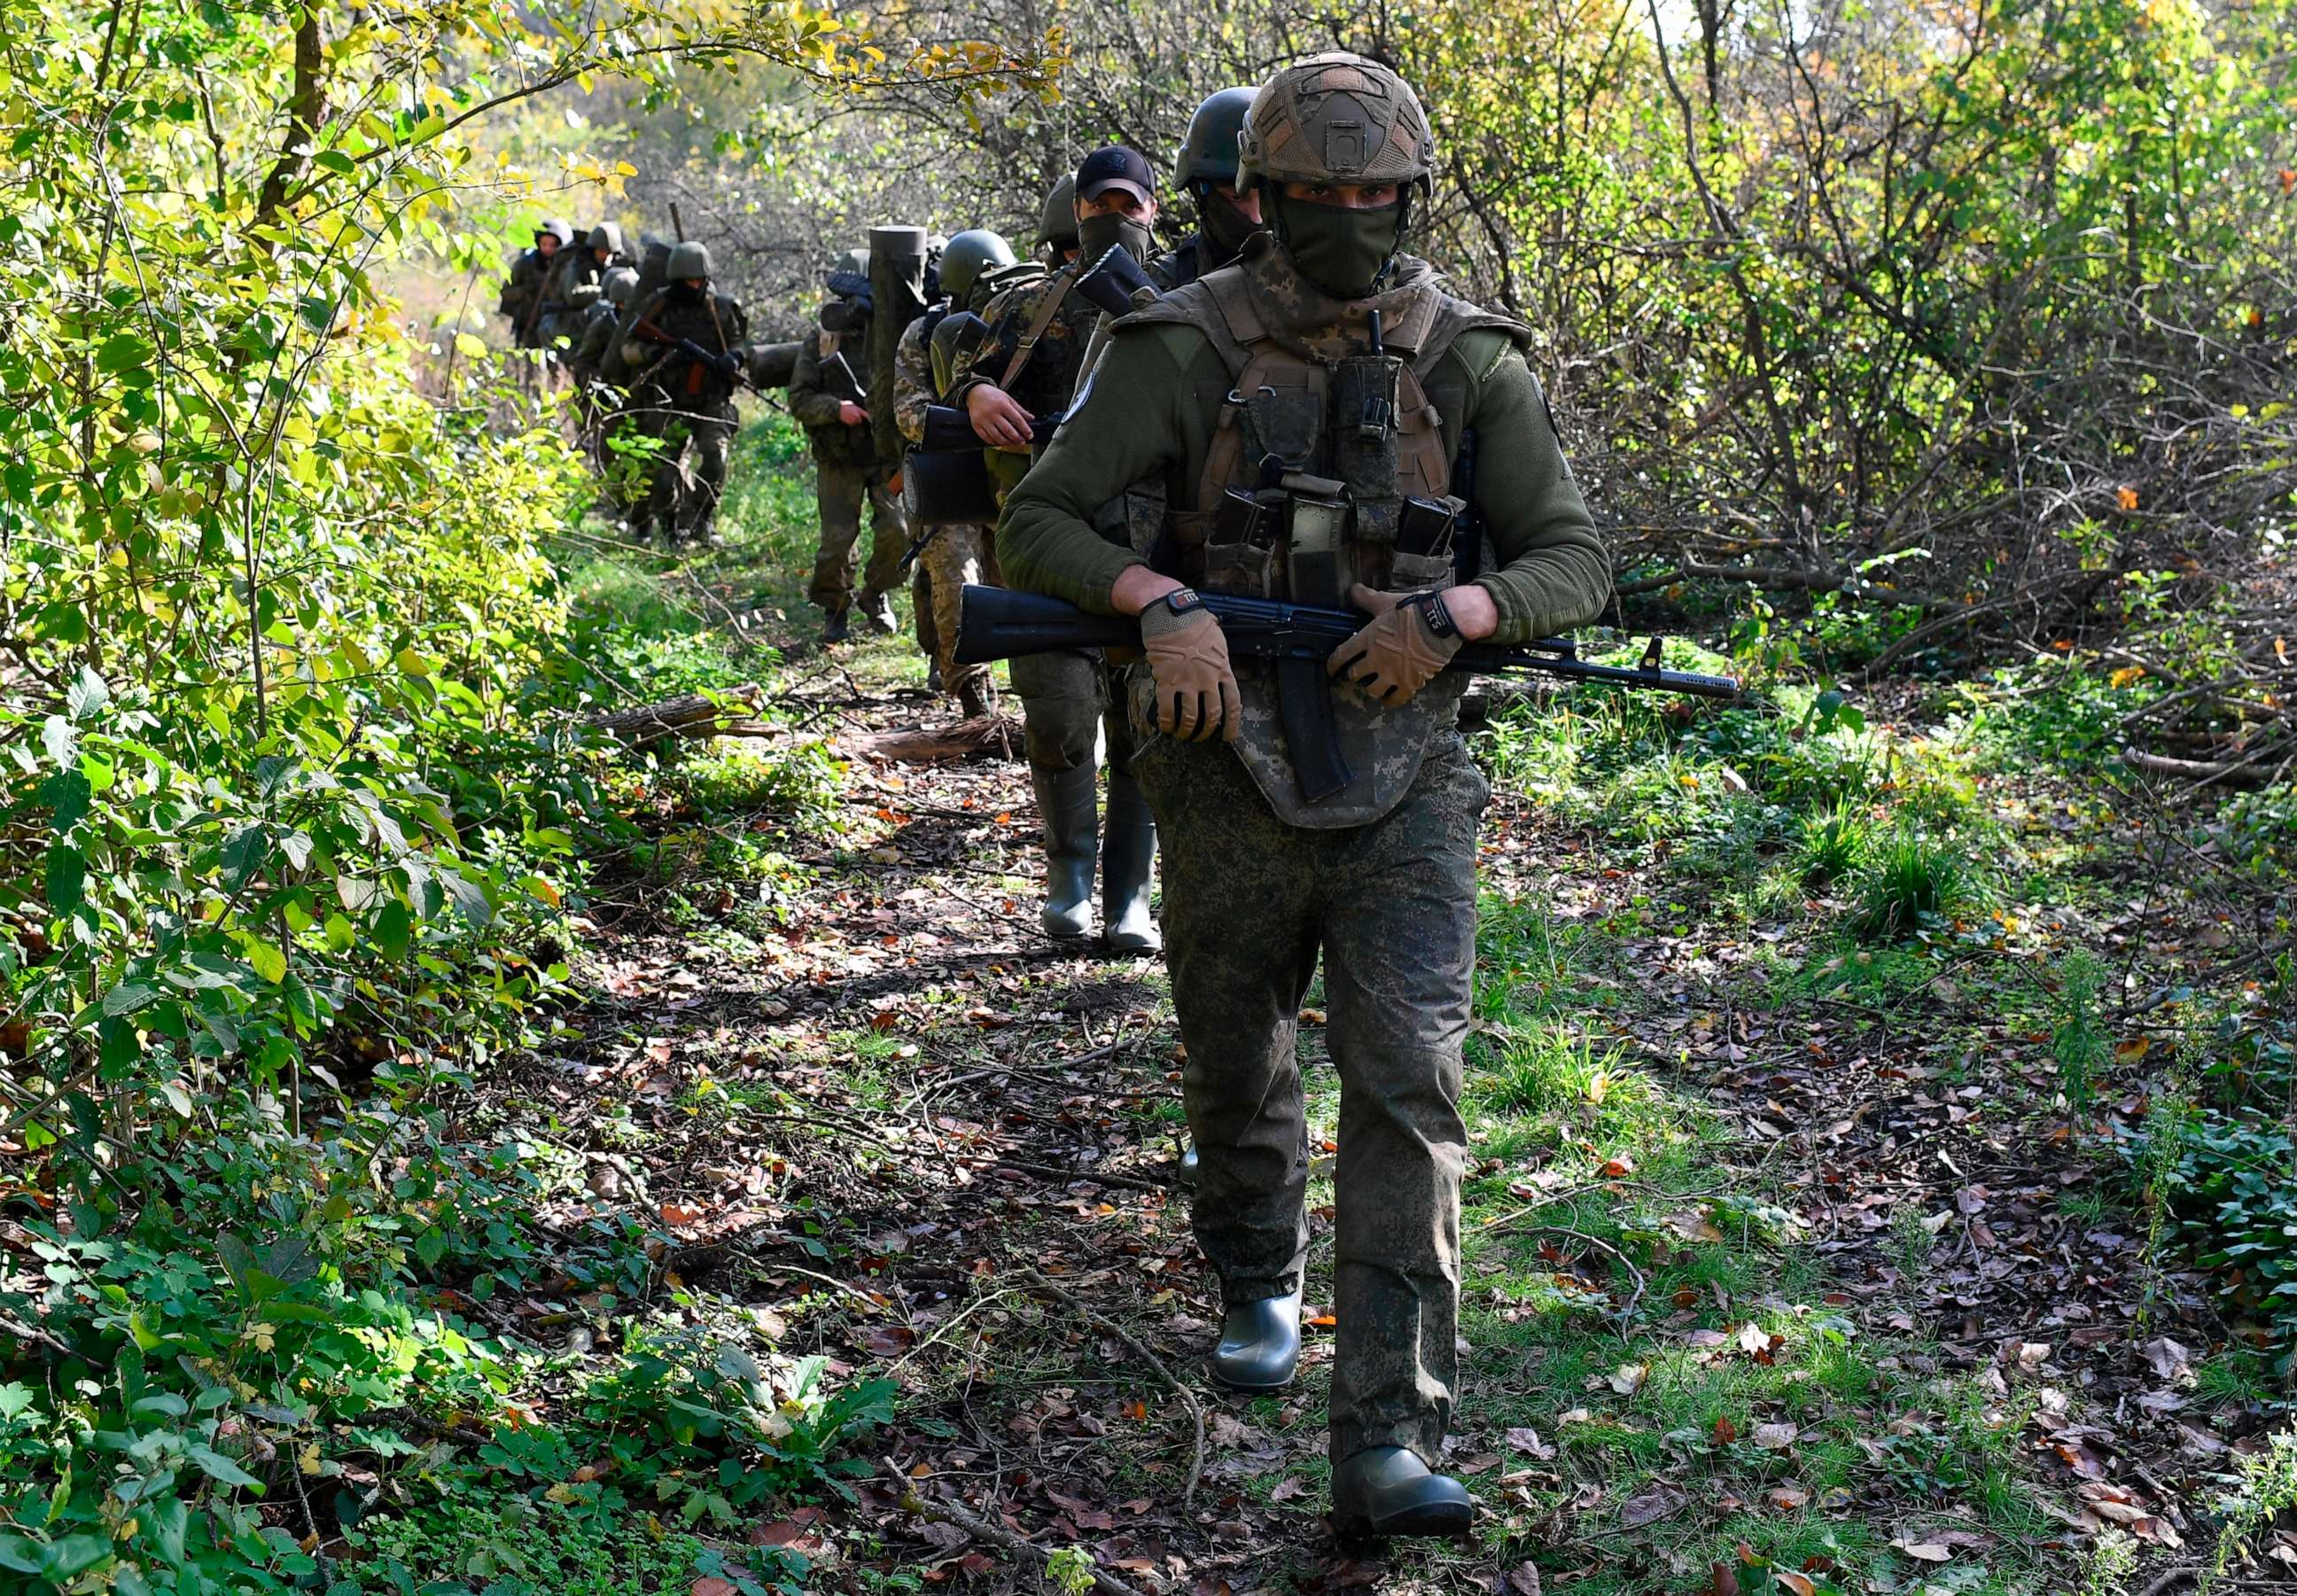 PHOTO: In this Oct. 13, 2022, file photo, service members of Russian private military company Wagner Group bring combat groups to their positions, as Russia's military operation in Ukraine continues, in Luhansk.